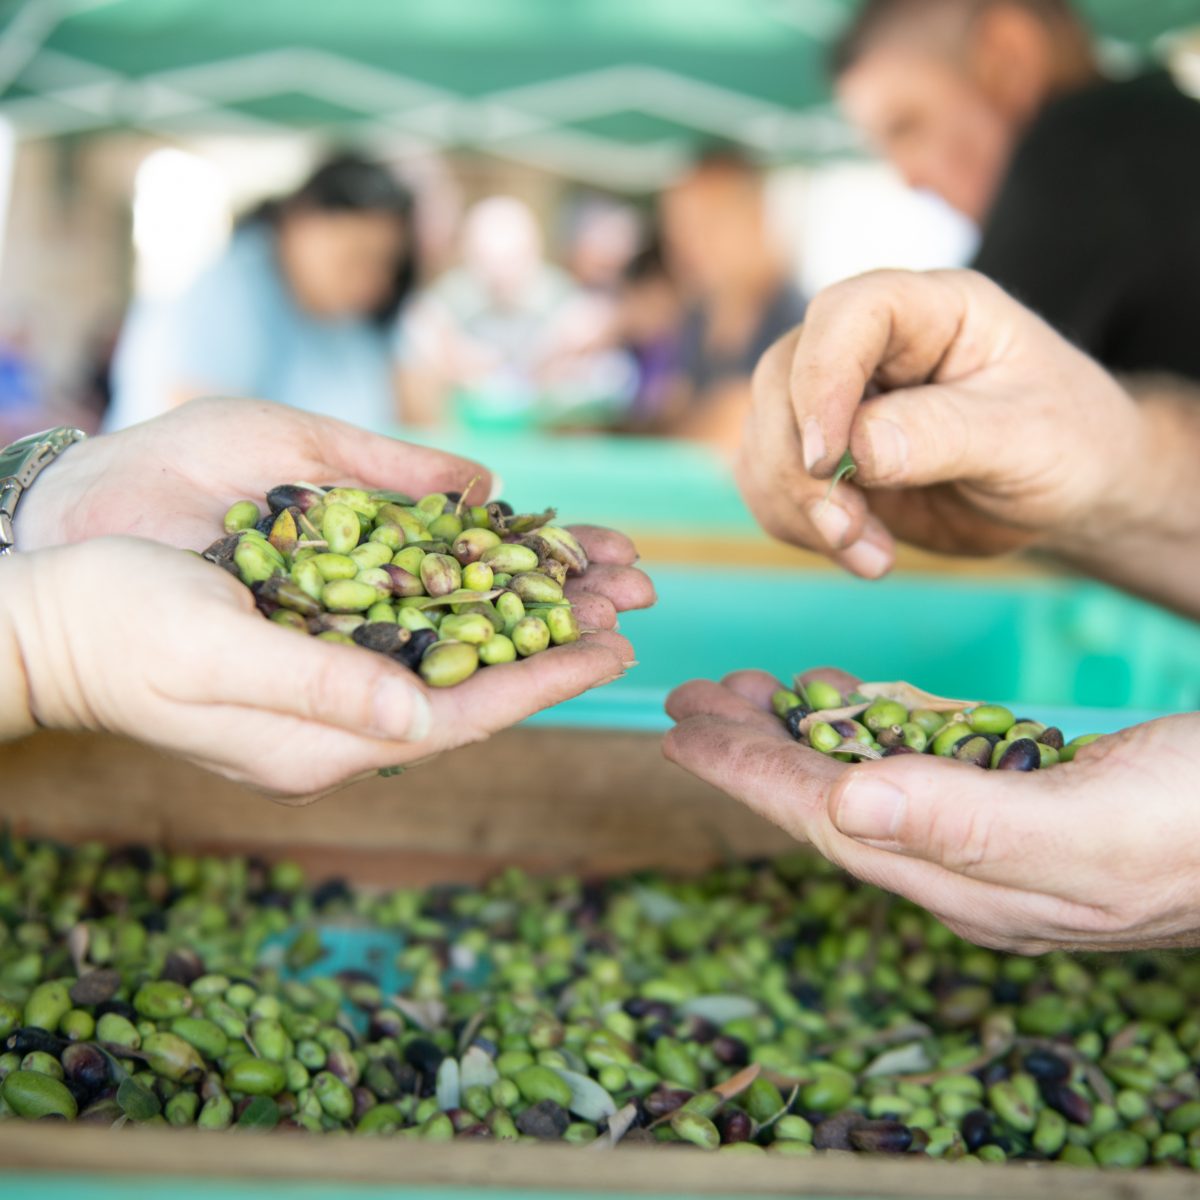 BOV Staff Joins Olive Picking Event in Support of Caritas